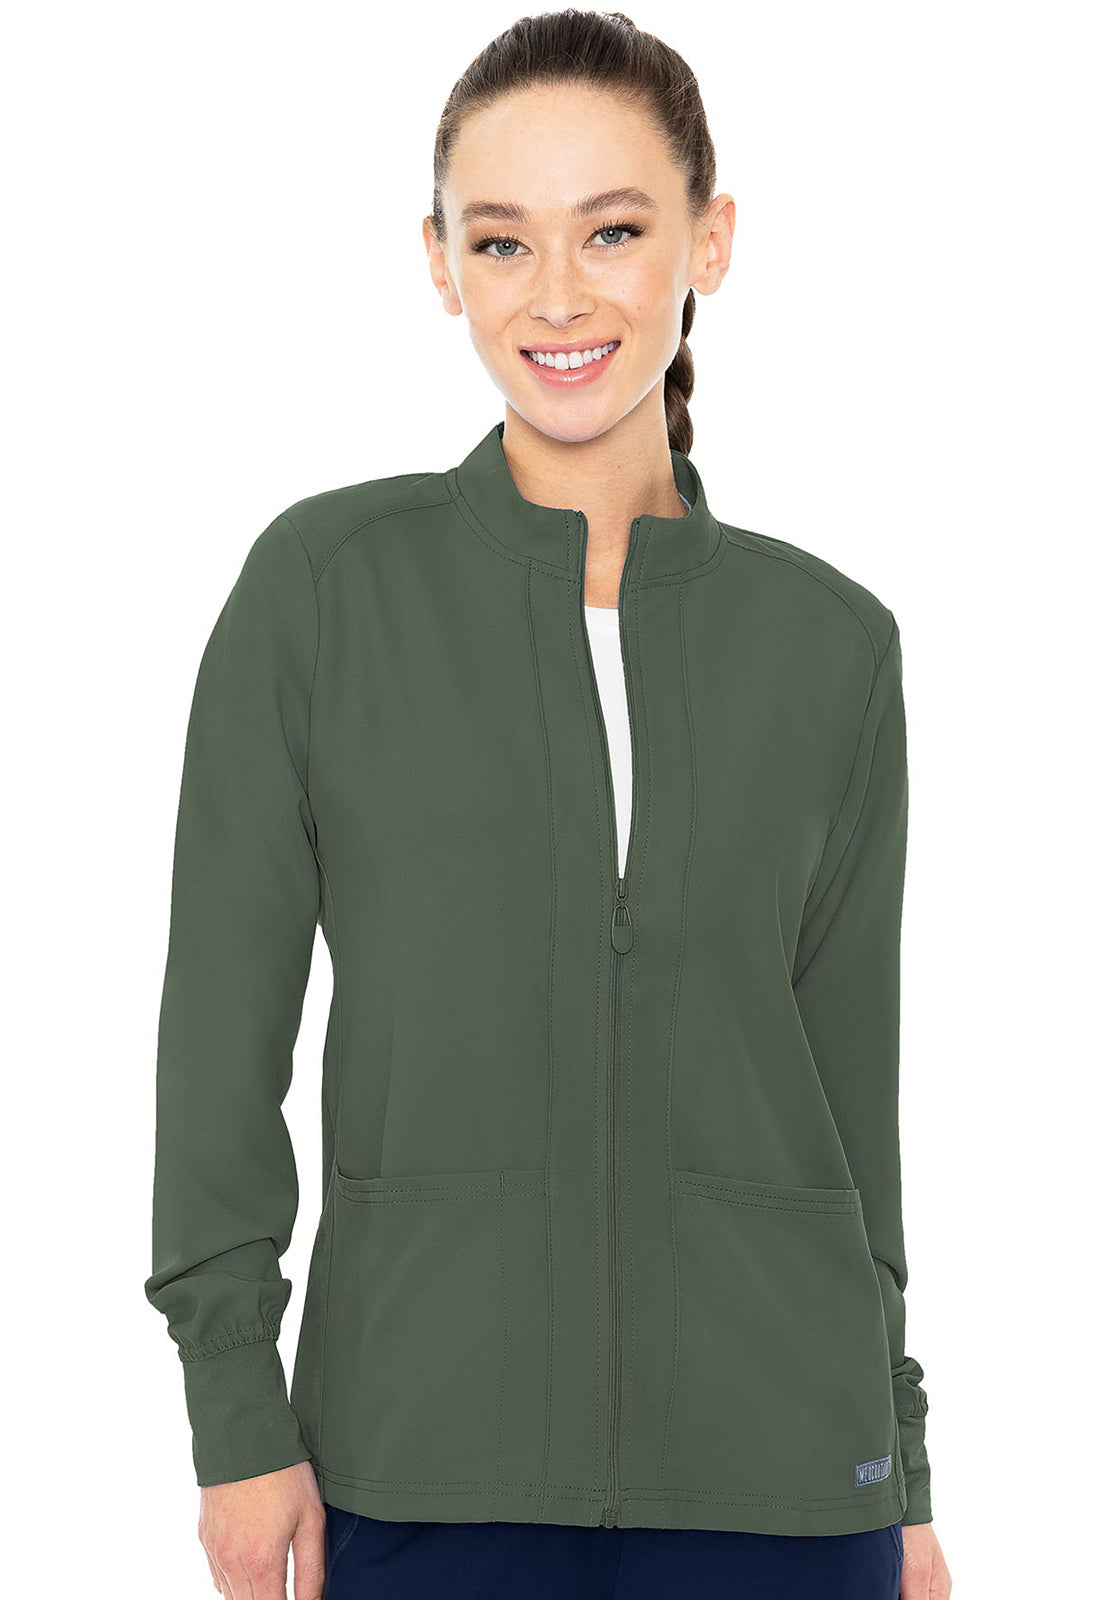 Med Couture Zip Front Warm-Up Jacket With Shoulder Yokes